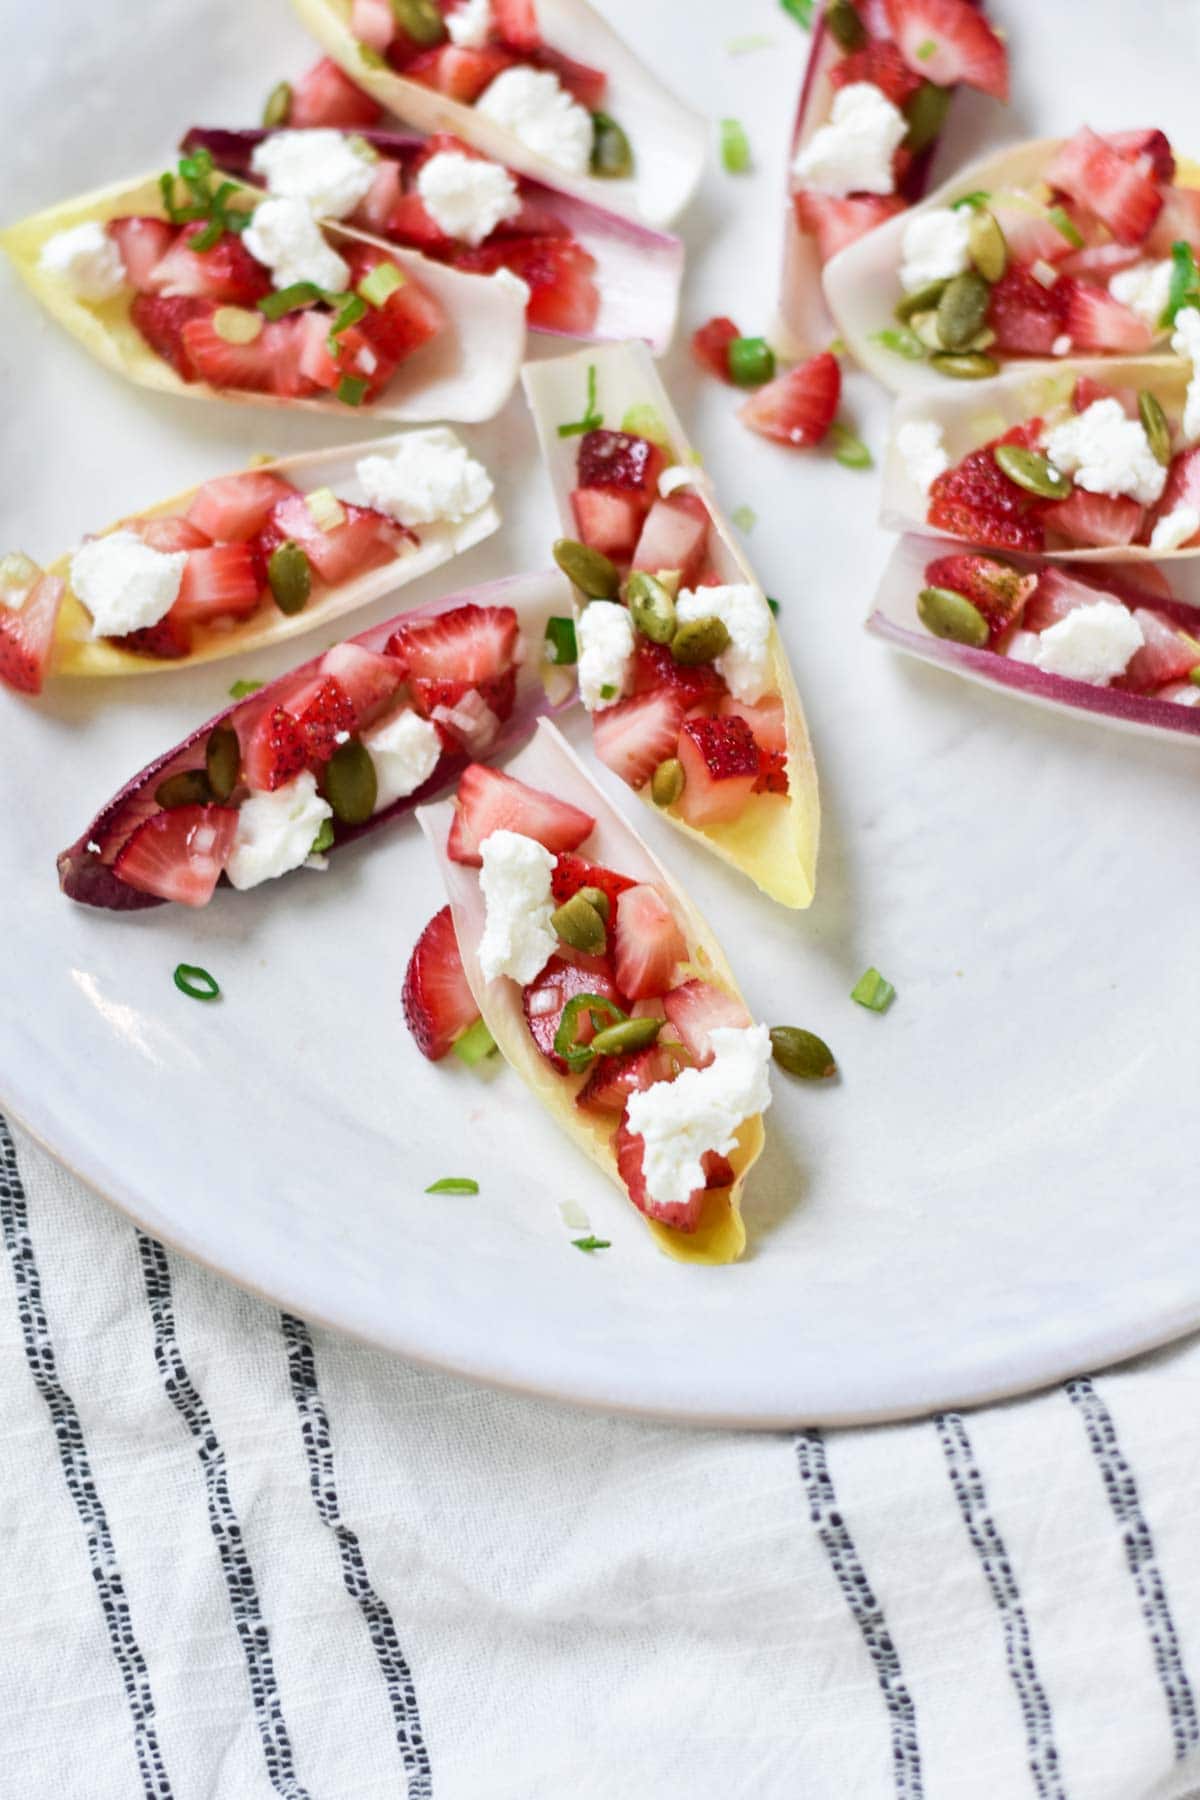 Endive, goat cheese, and strawberries on a plate with a towel.